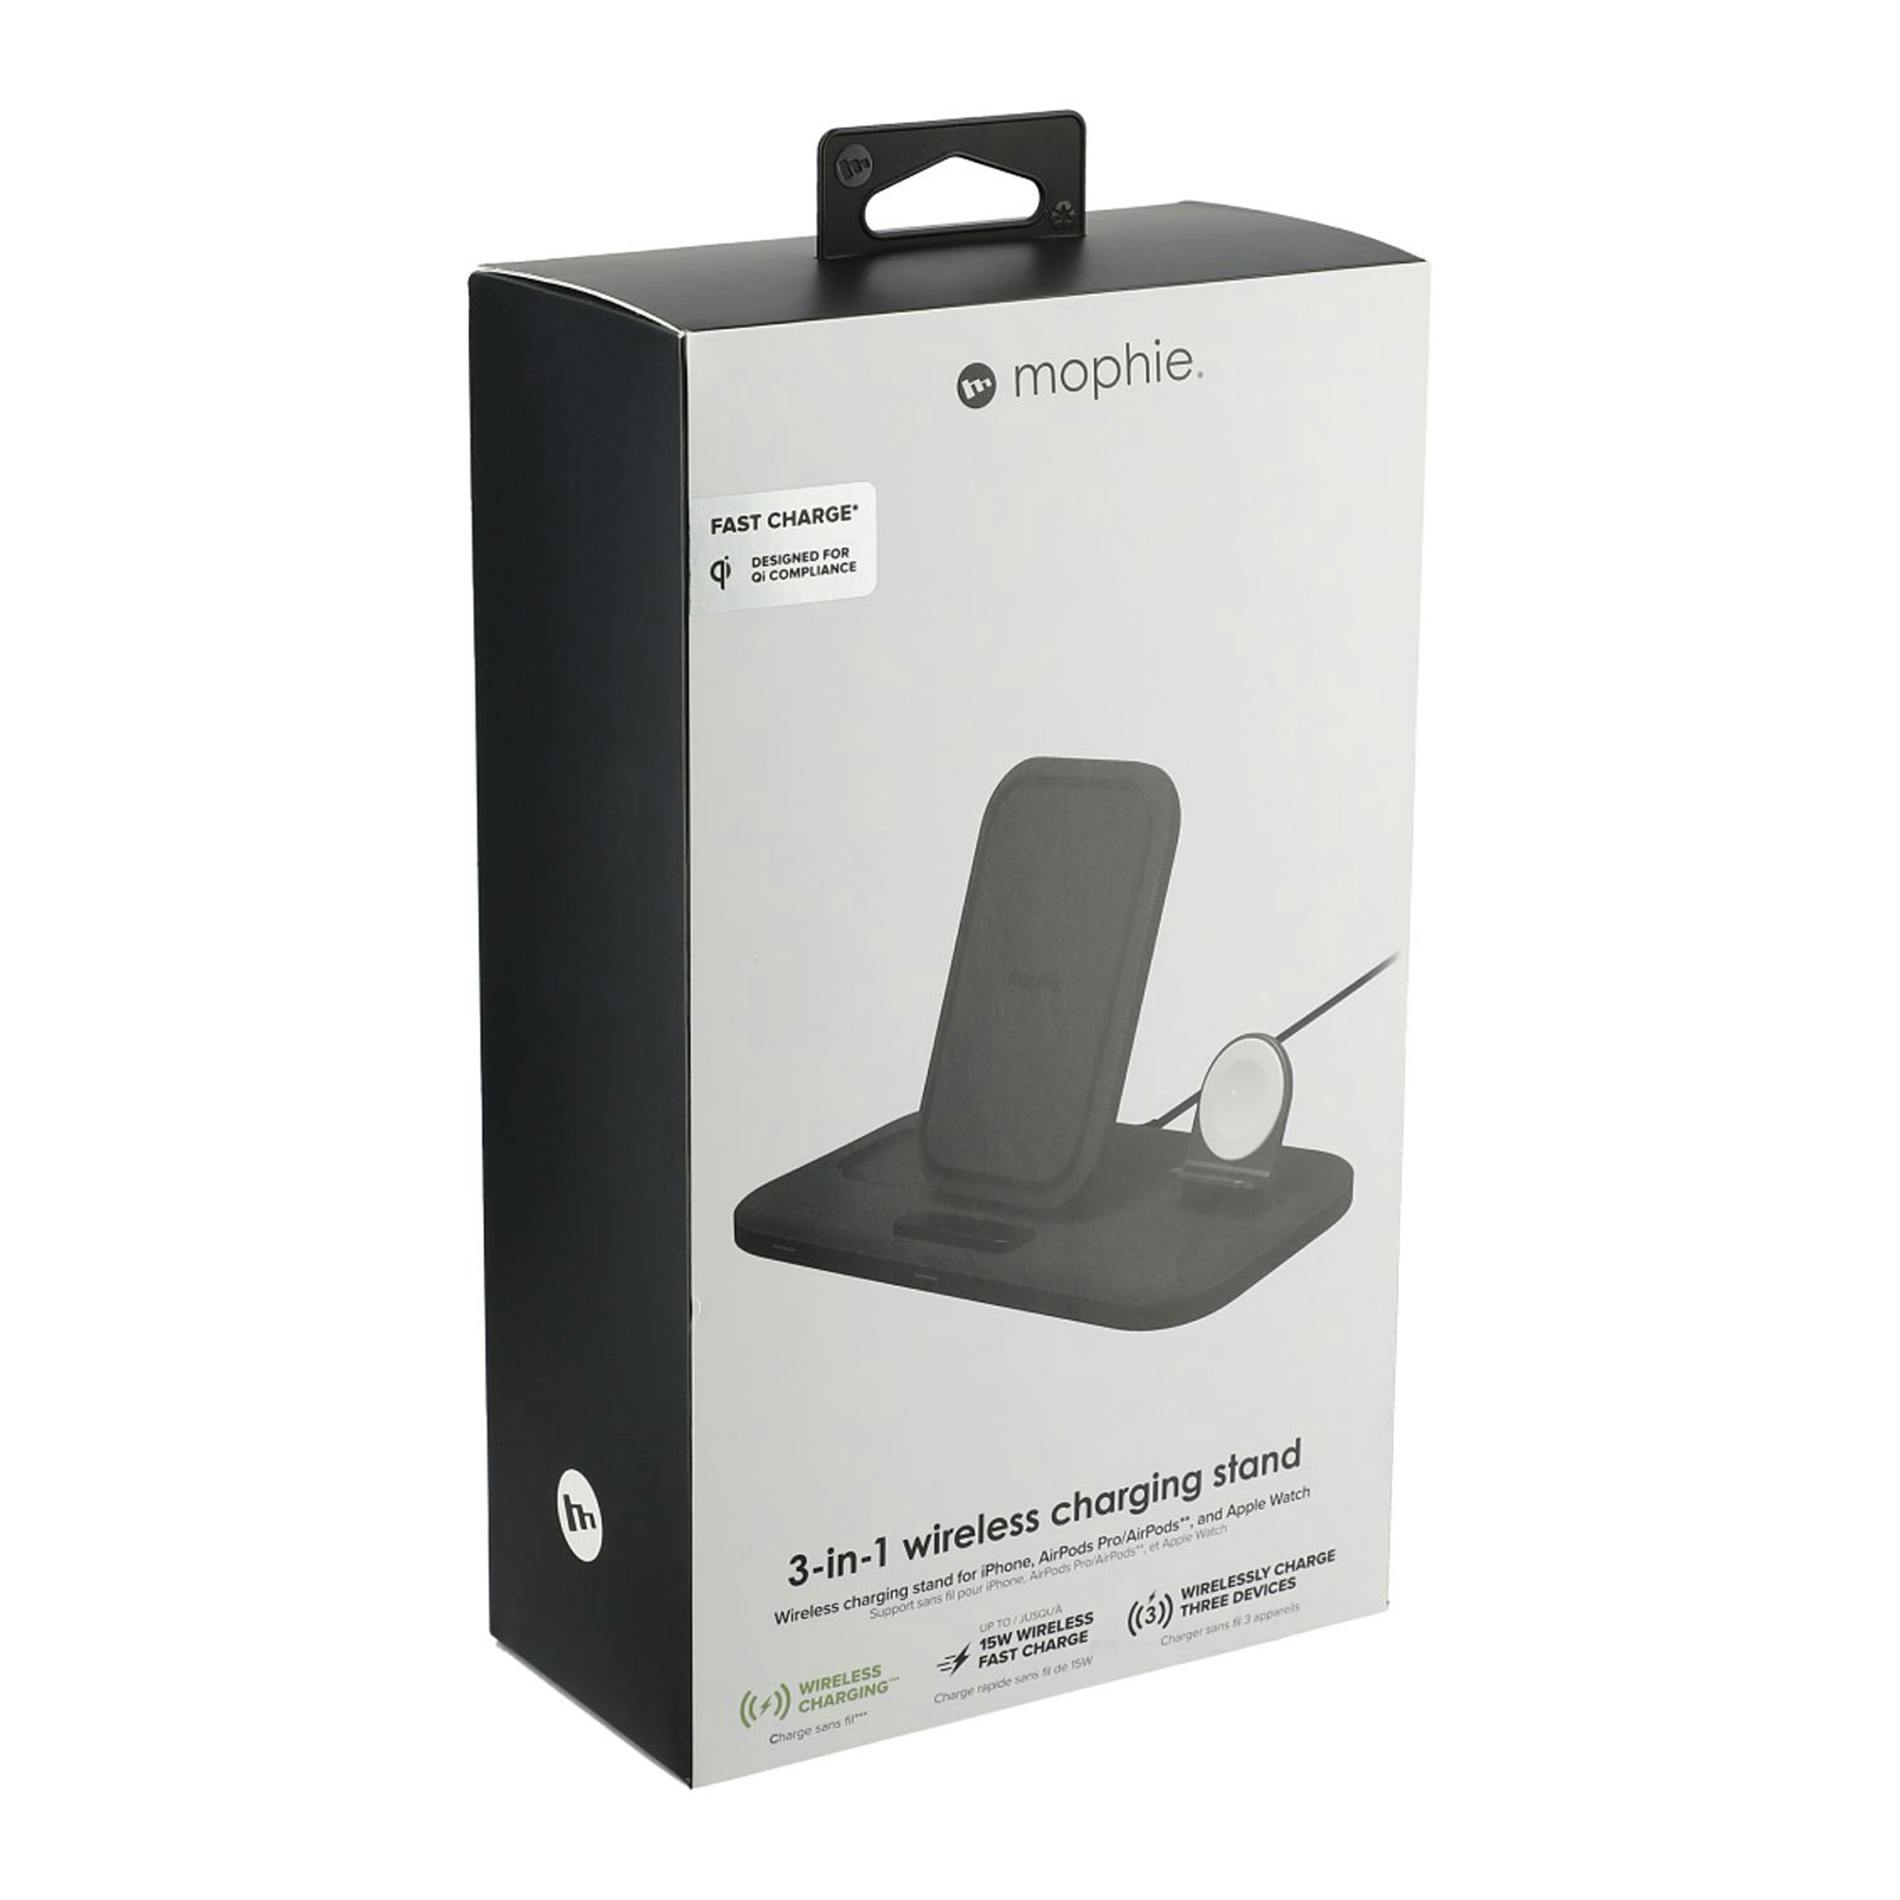 mophie® 3-in-1 Wireless Charging Stand - additional Image 1